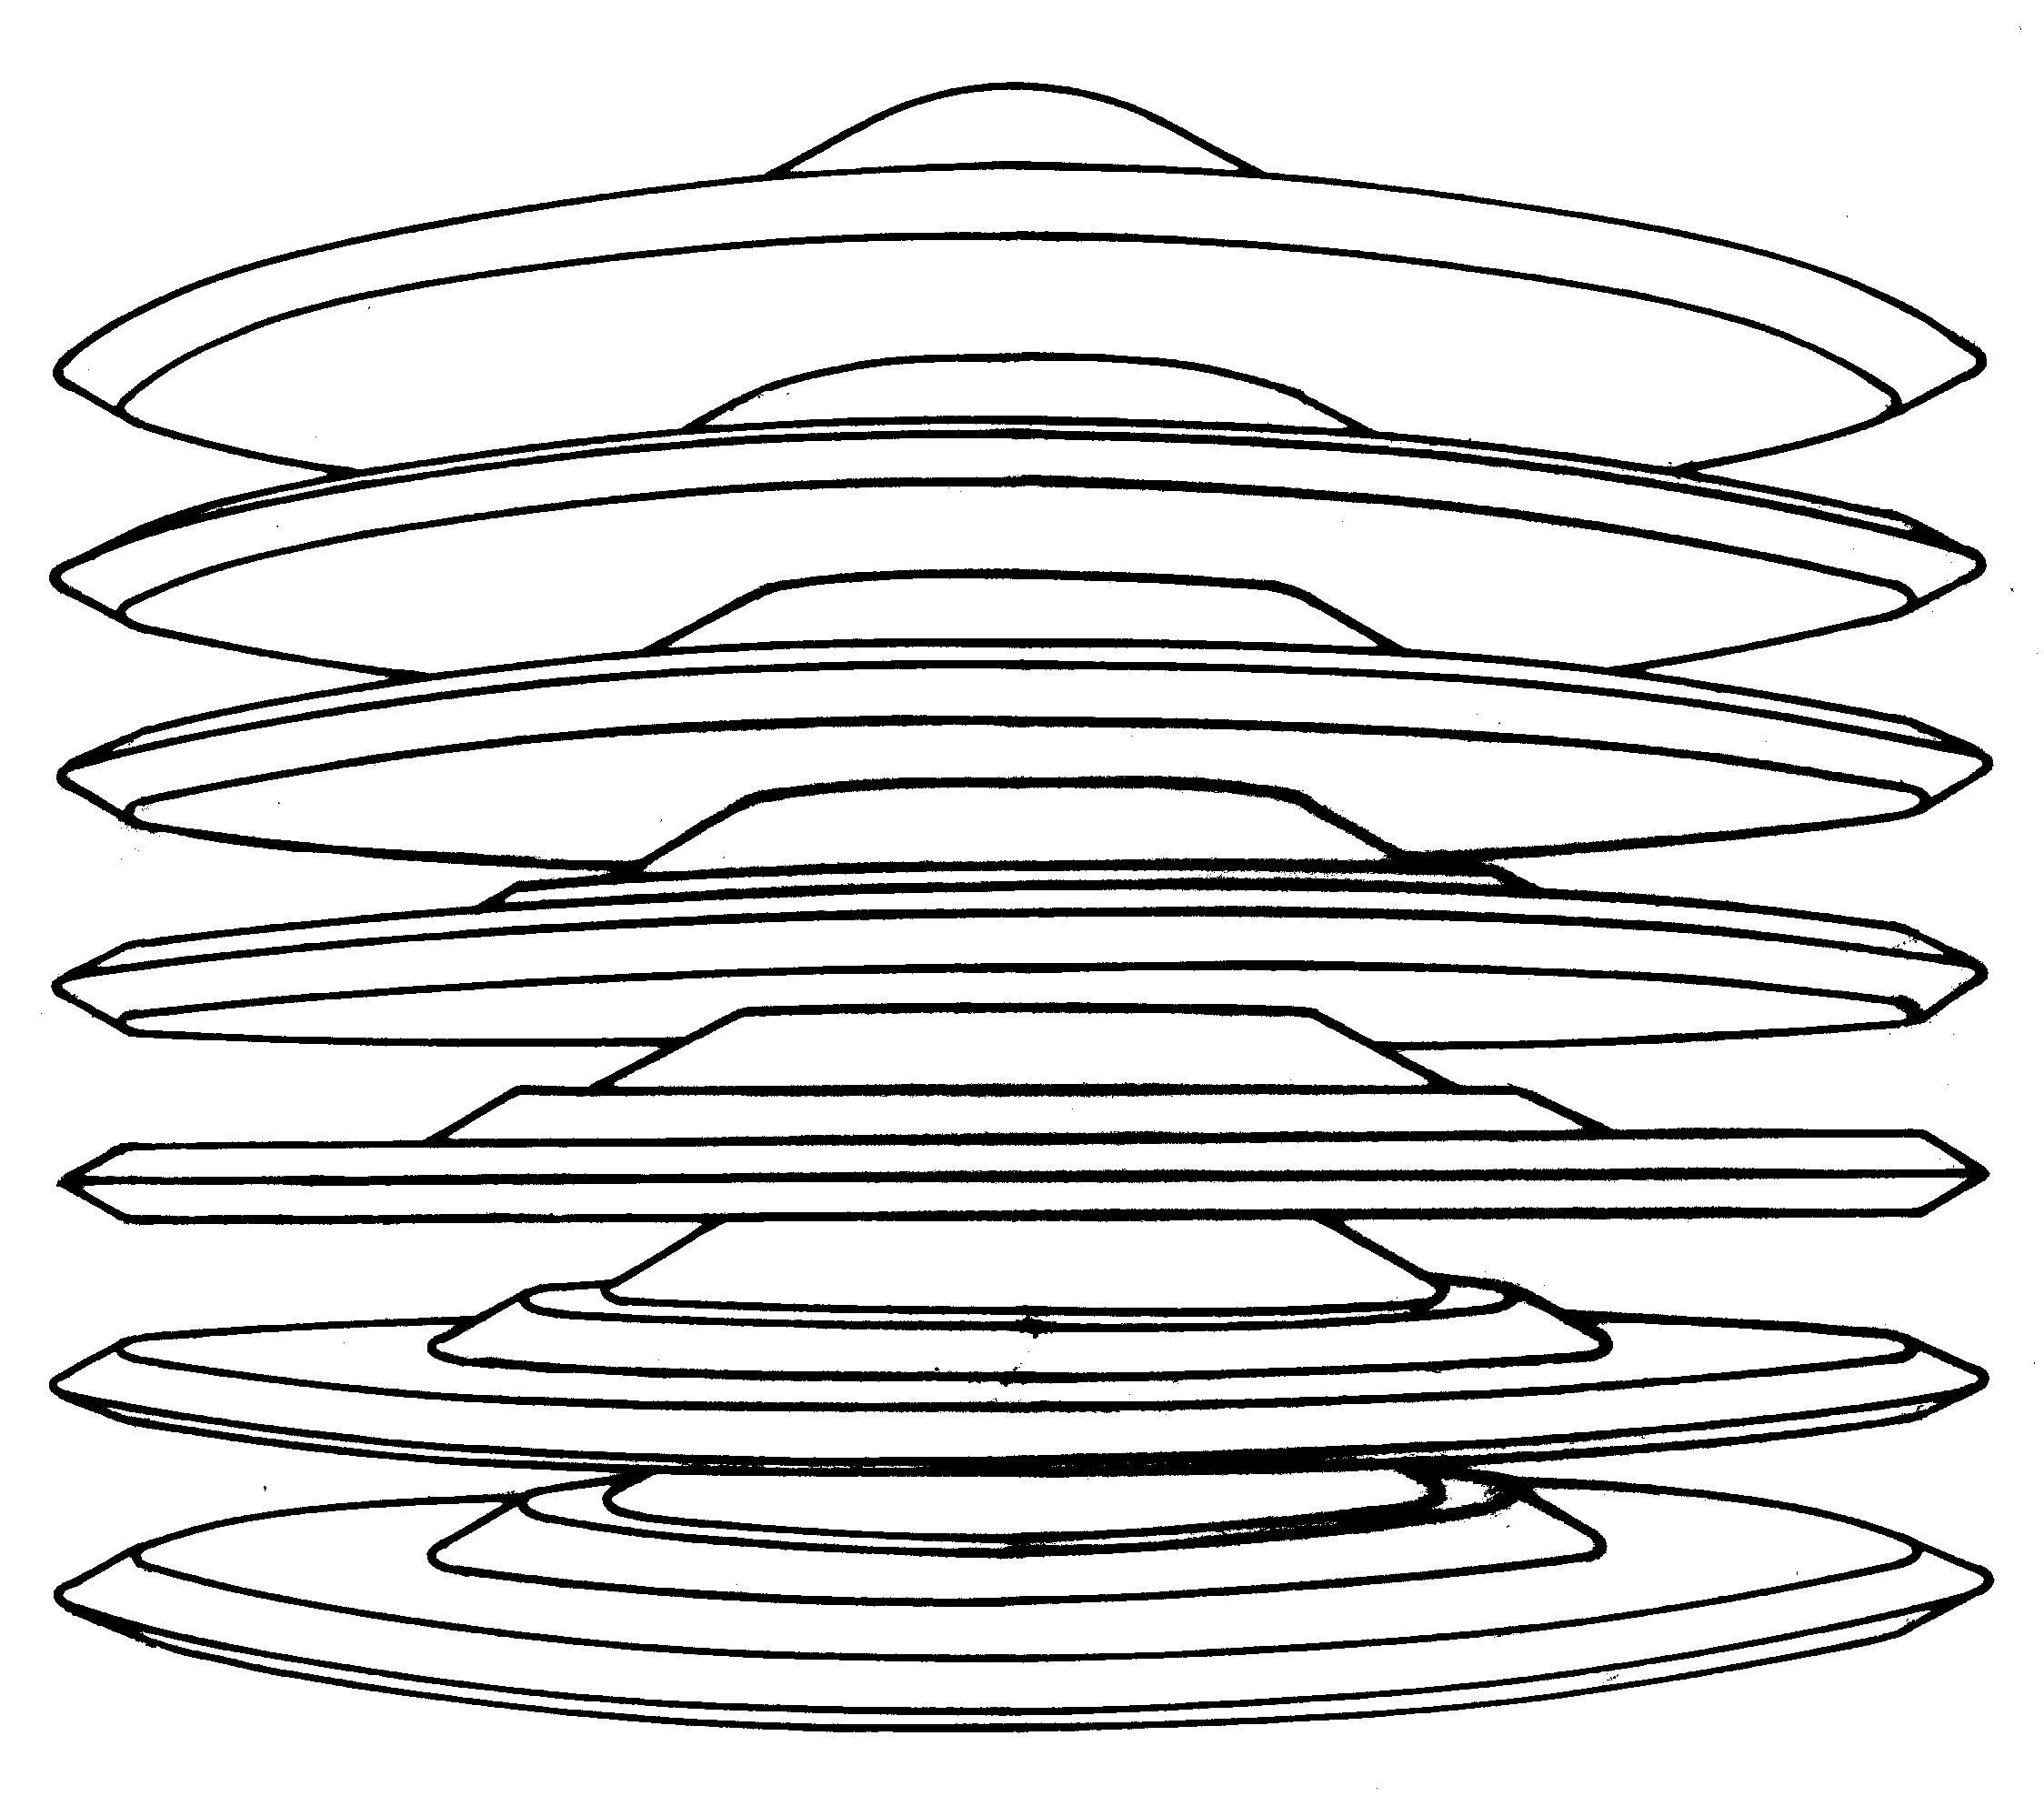 Fig. #3a (top): A stack of 7 UFOs type K6 - a side view